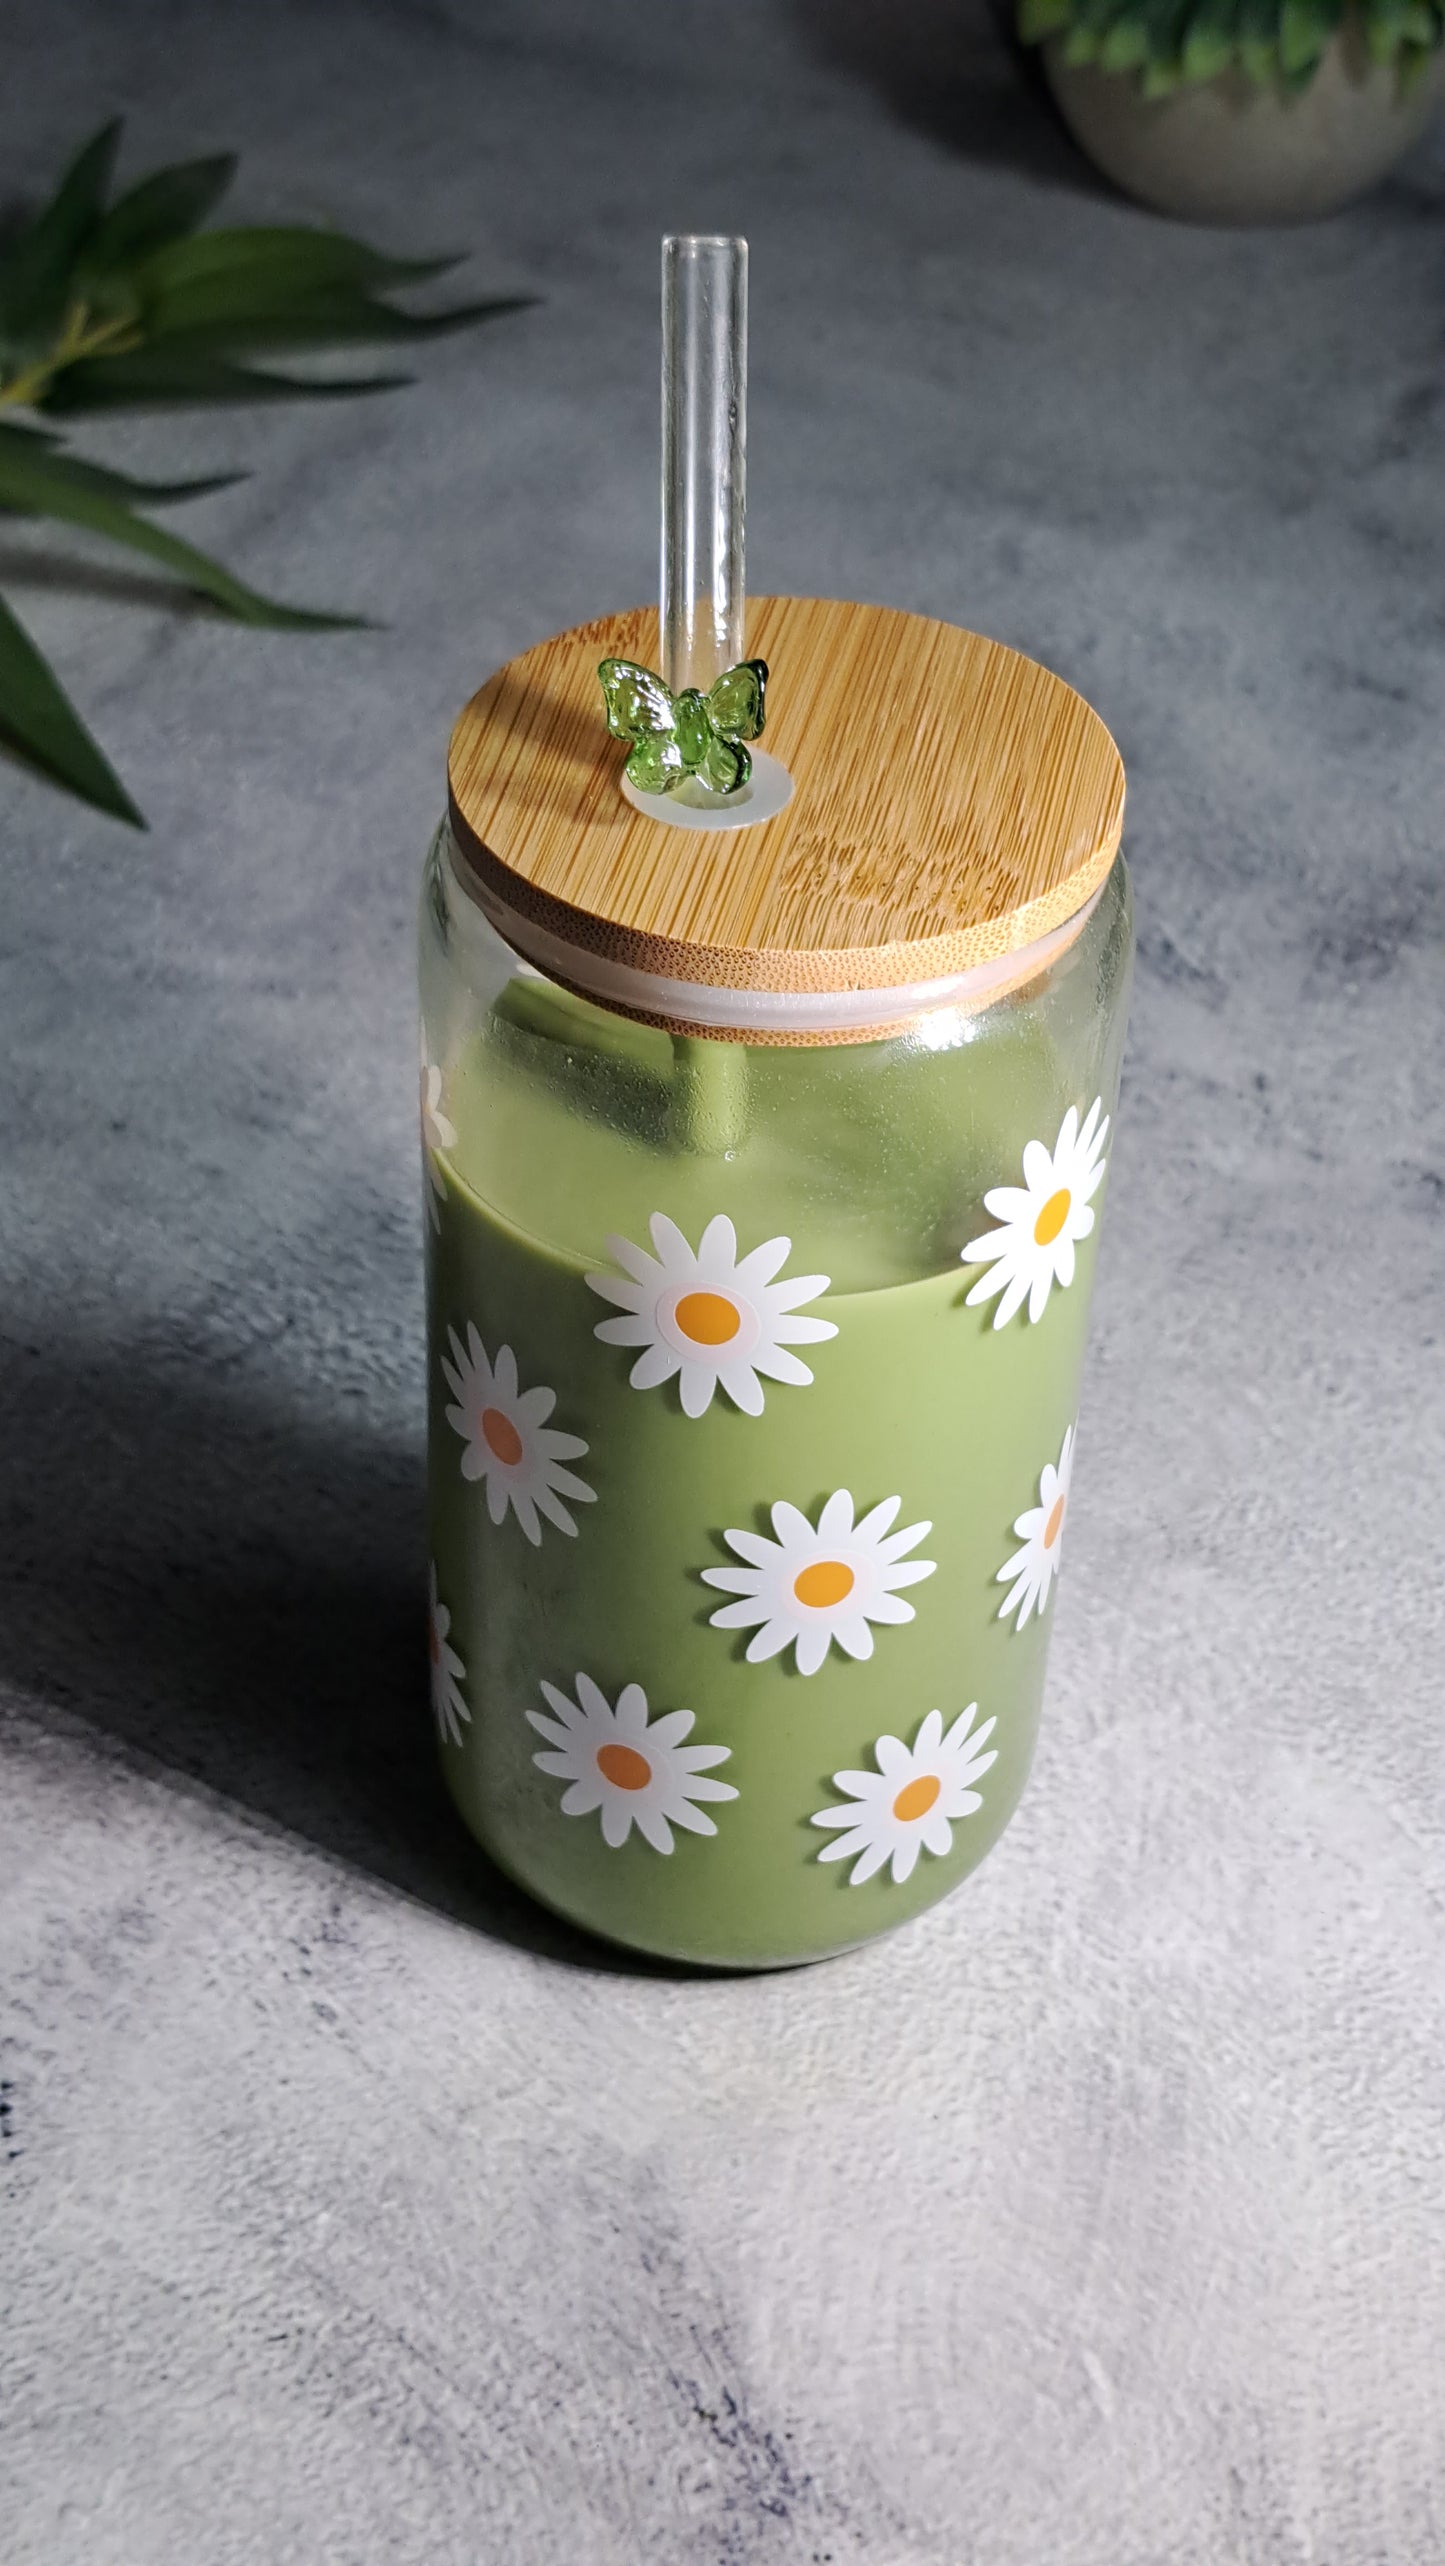 Daisy Patterned Matcha Glass Cup with Bamboo Lid and Glass Straw - 500ml. Perfect for birthdays, housewarming gifts, tea sets, graduations, weddings, bachelorette parties and Christmas gifts.